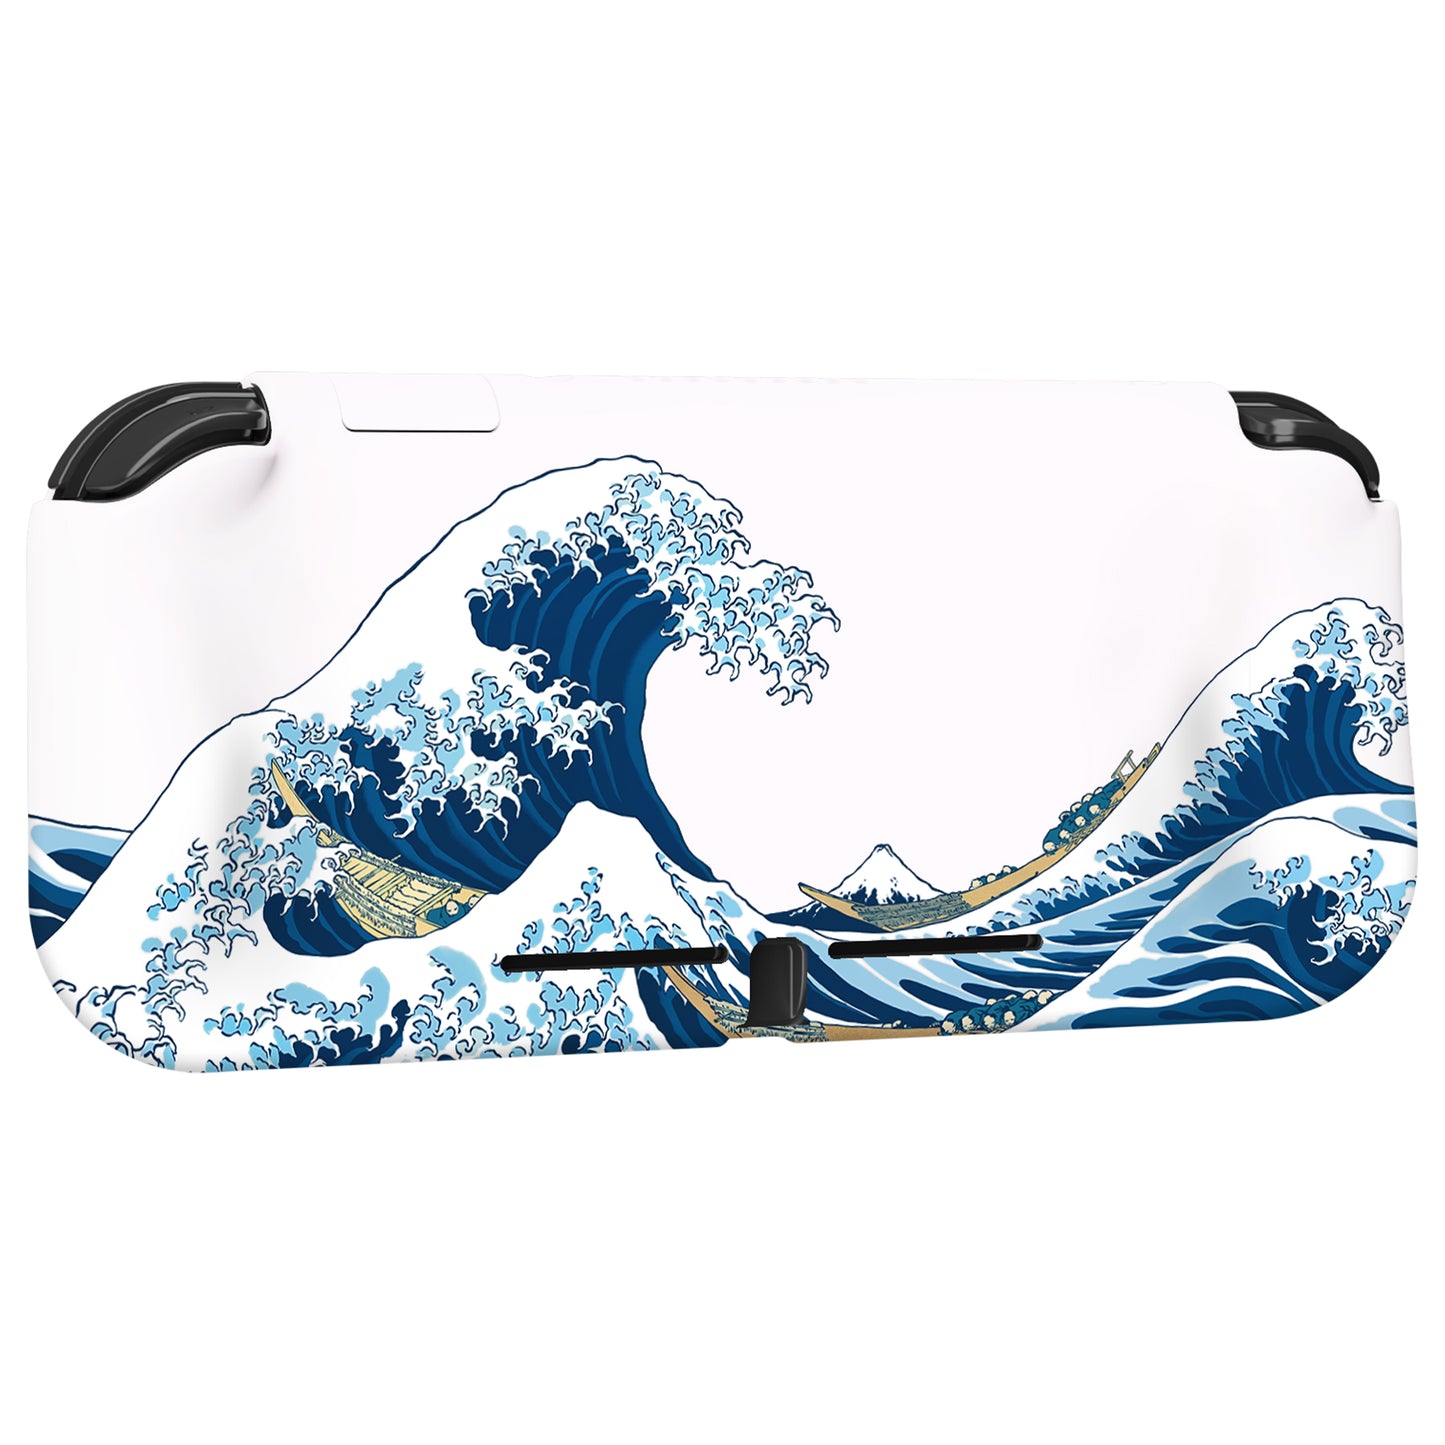 PlayVital ZealProtect Protective Case for Nintendo Switch Lite, Hard Shell Ergonomic Grip Cover for Nintendo Switch Lite w/Screen Protector & Thumb Grip Caps & Button Caps - The Great Wave off Kanagawa - PSLYT001 playvital